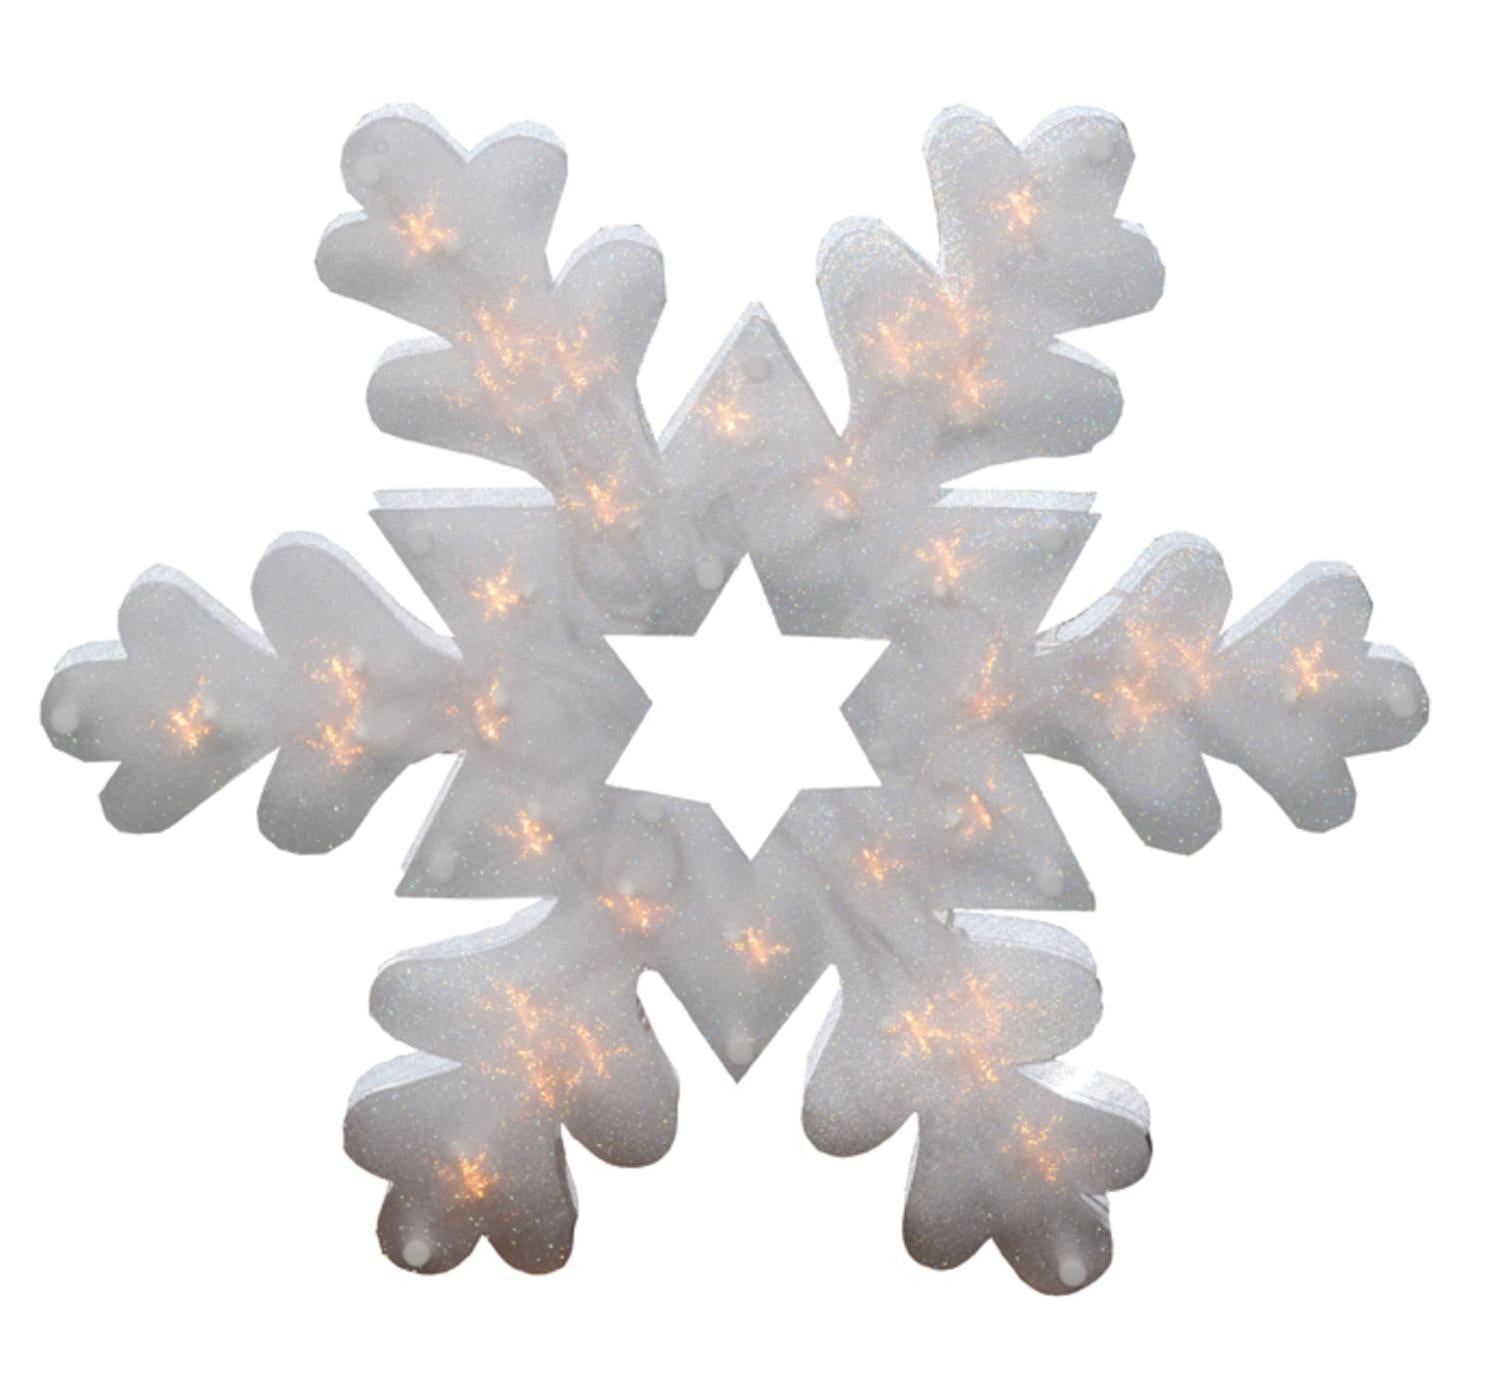 16.5" Lighted Shimmering Snowflake Christmas Window Silhouette Decoration